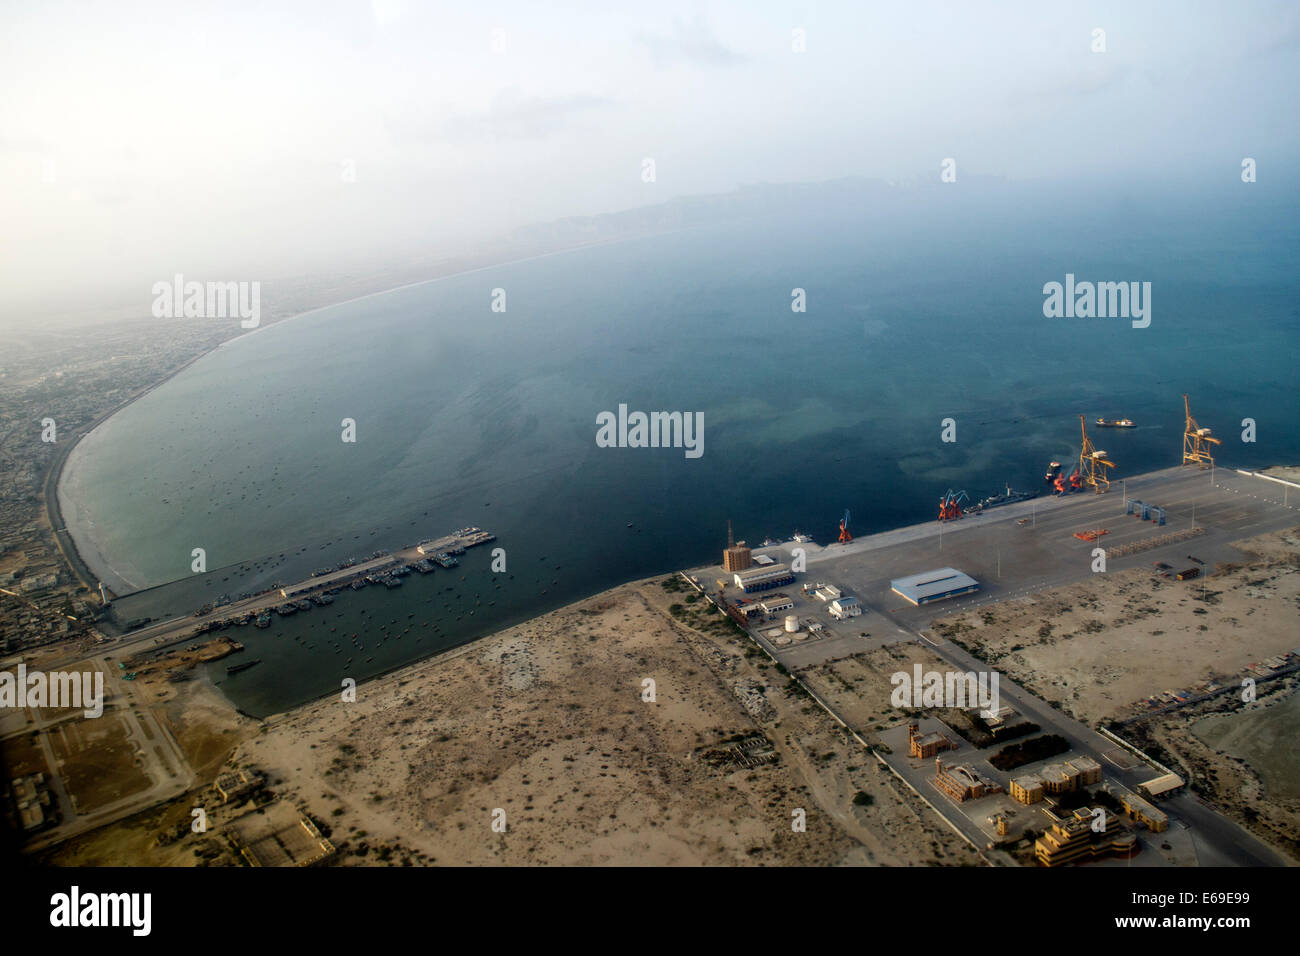 Islamabad. 18th Aug, 2014. Photo taken on Aug. 18, 2014 shows an aerial view of Gwadar Port in Balochistan province, Pakistan. Gwadar Port is a warm-water, deep-sea port situated on the Arabian Sea at Gwadar in Balochistan province of Pakistan. Gwadar Port is owned by the government-owned Gwadar Port Authority and operated by China Overseas Port Holding Company (COPHC). © Huang Zongzhi/Xinhua/Alamy Live News Stock Photo